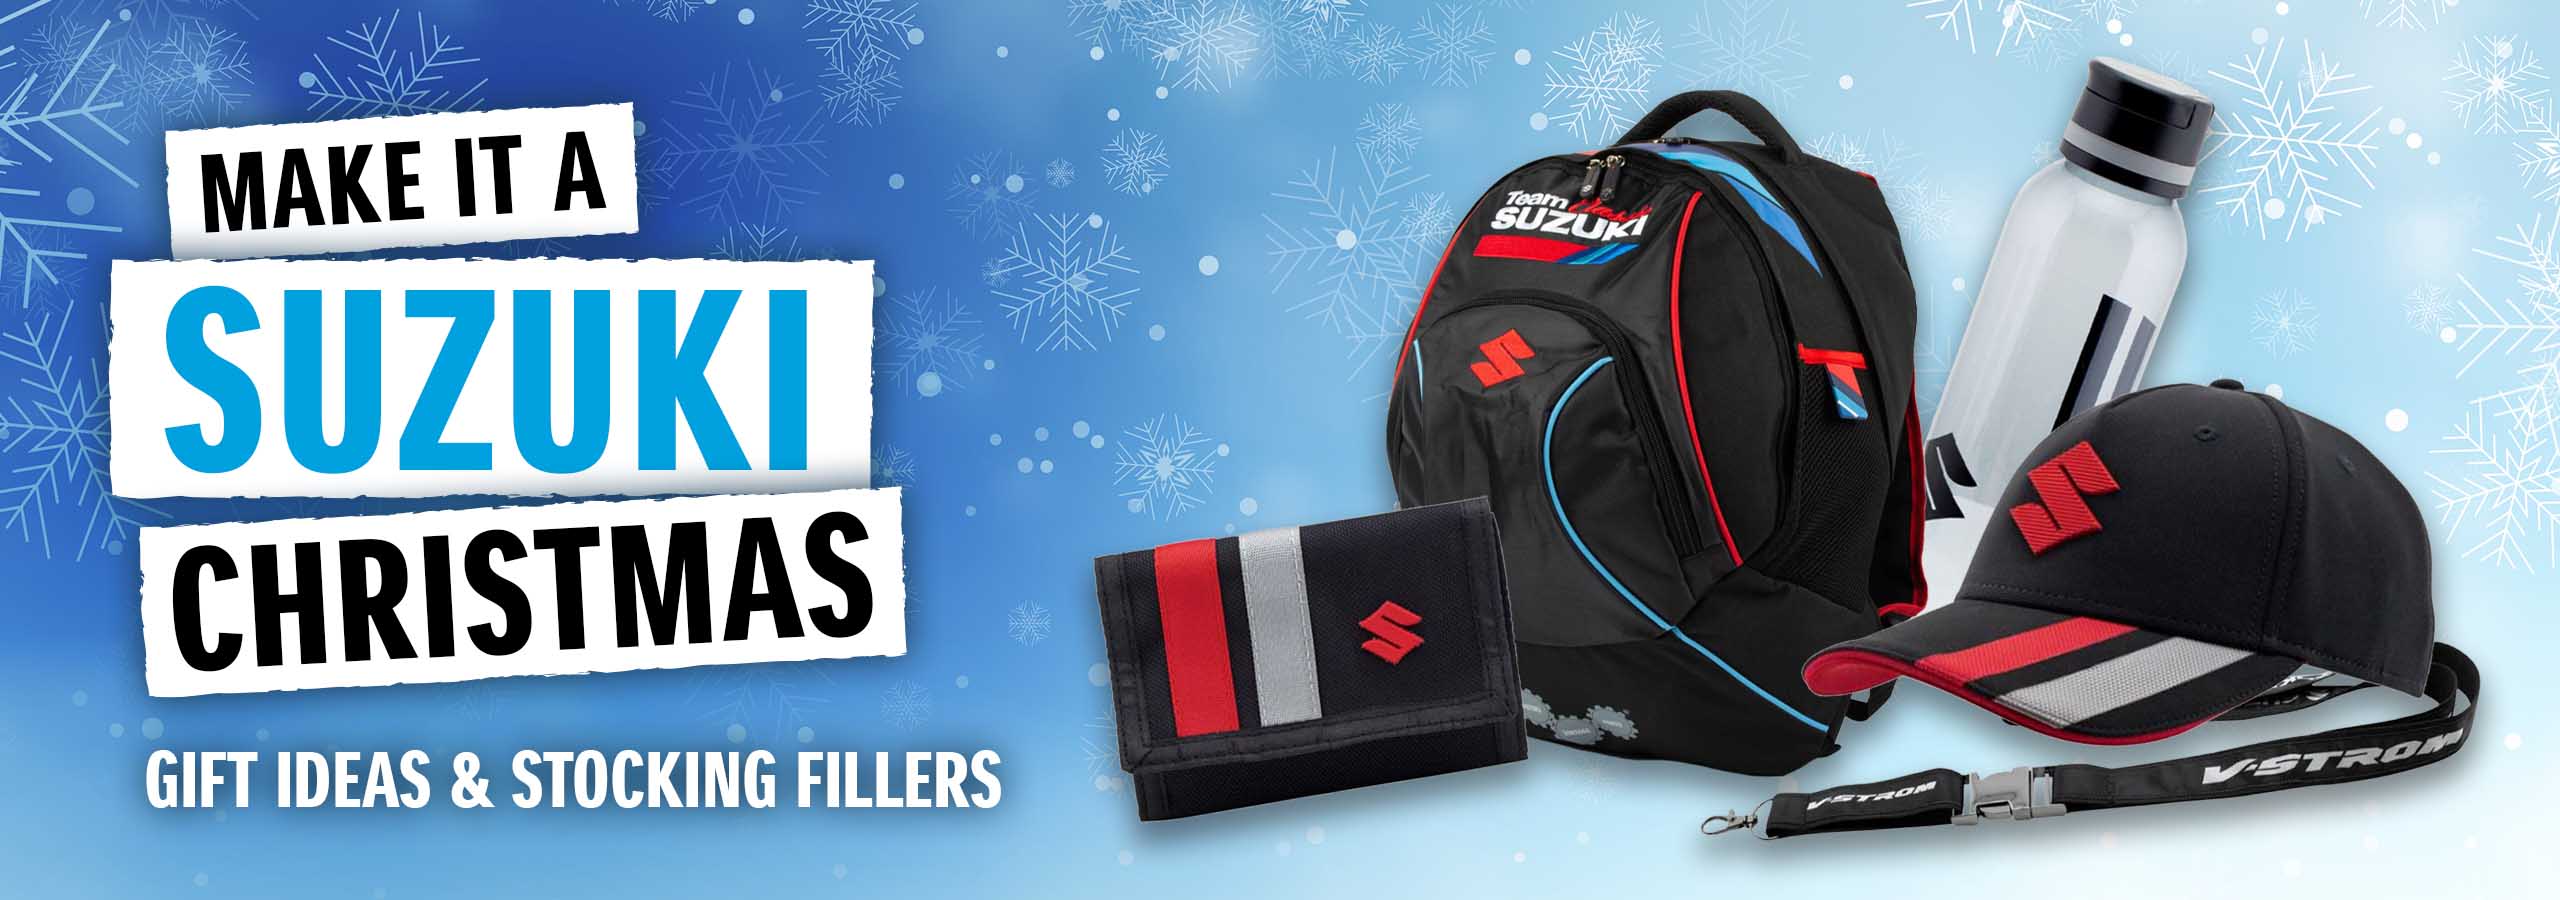 Shop our Suzuki gift ideas at Laguna Motorcycles in Maidstone and online at Laguna Direct